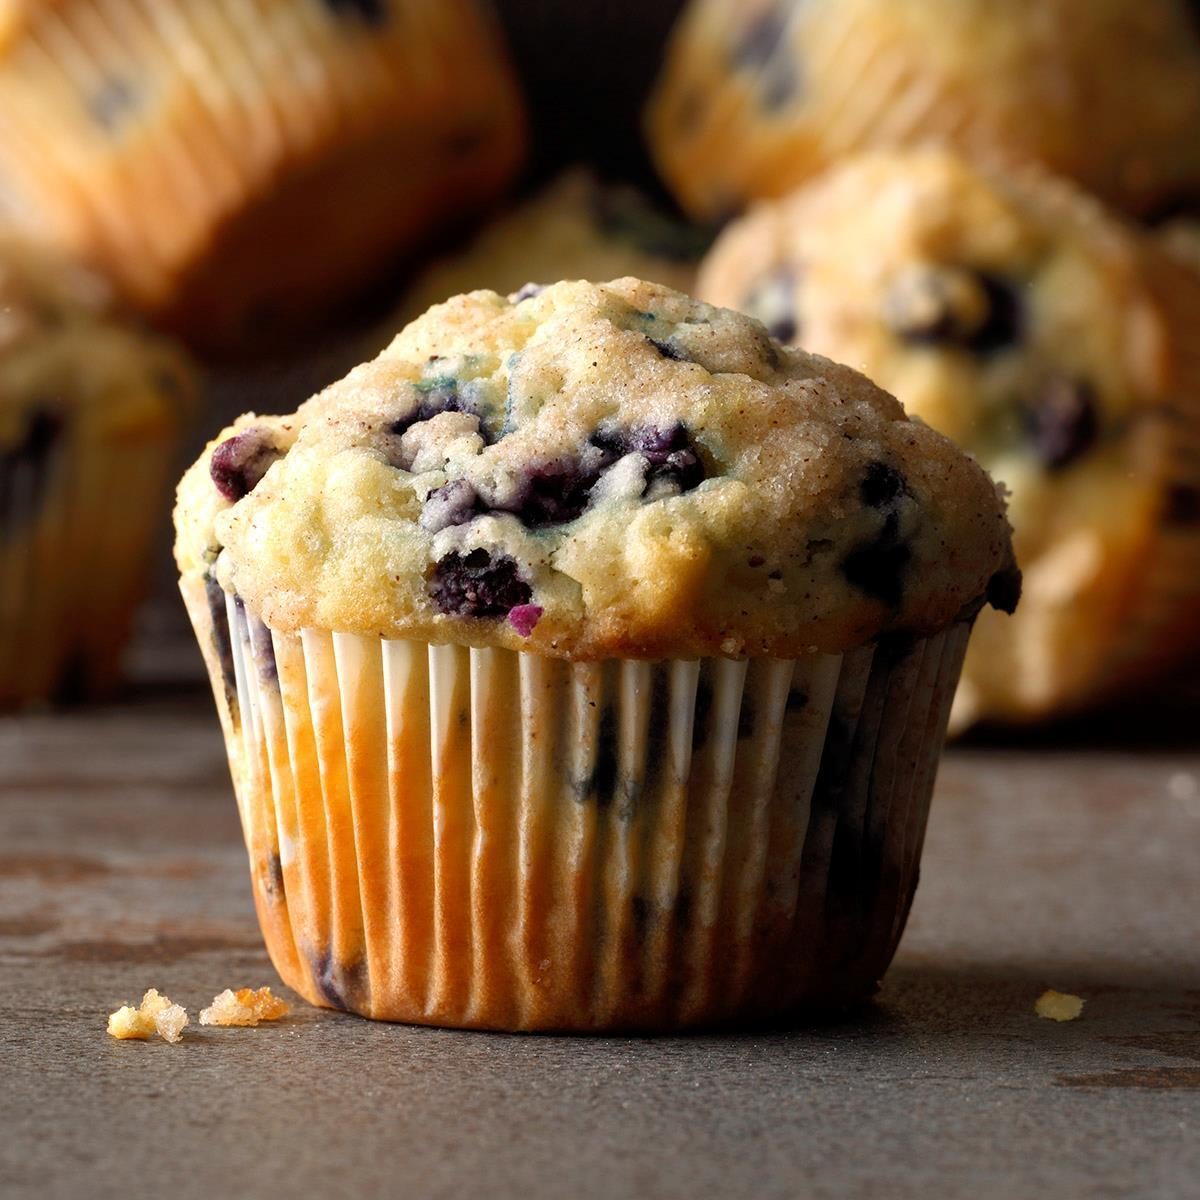 Sour Cream Blueberry Muffins Recipe: How to Make It